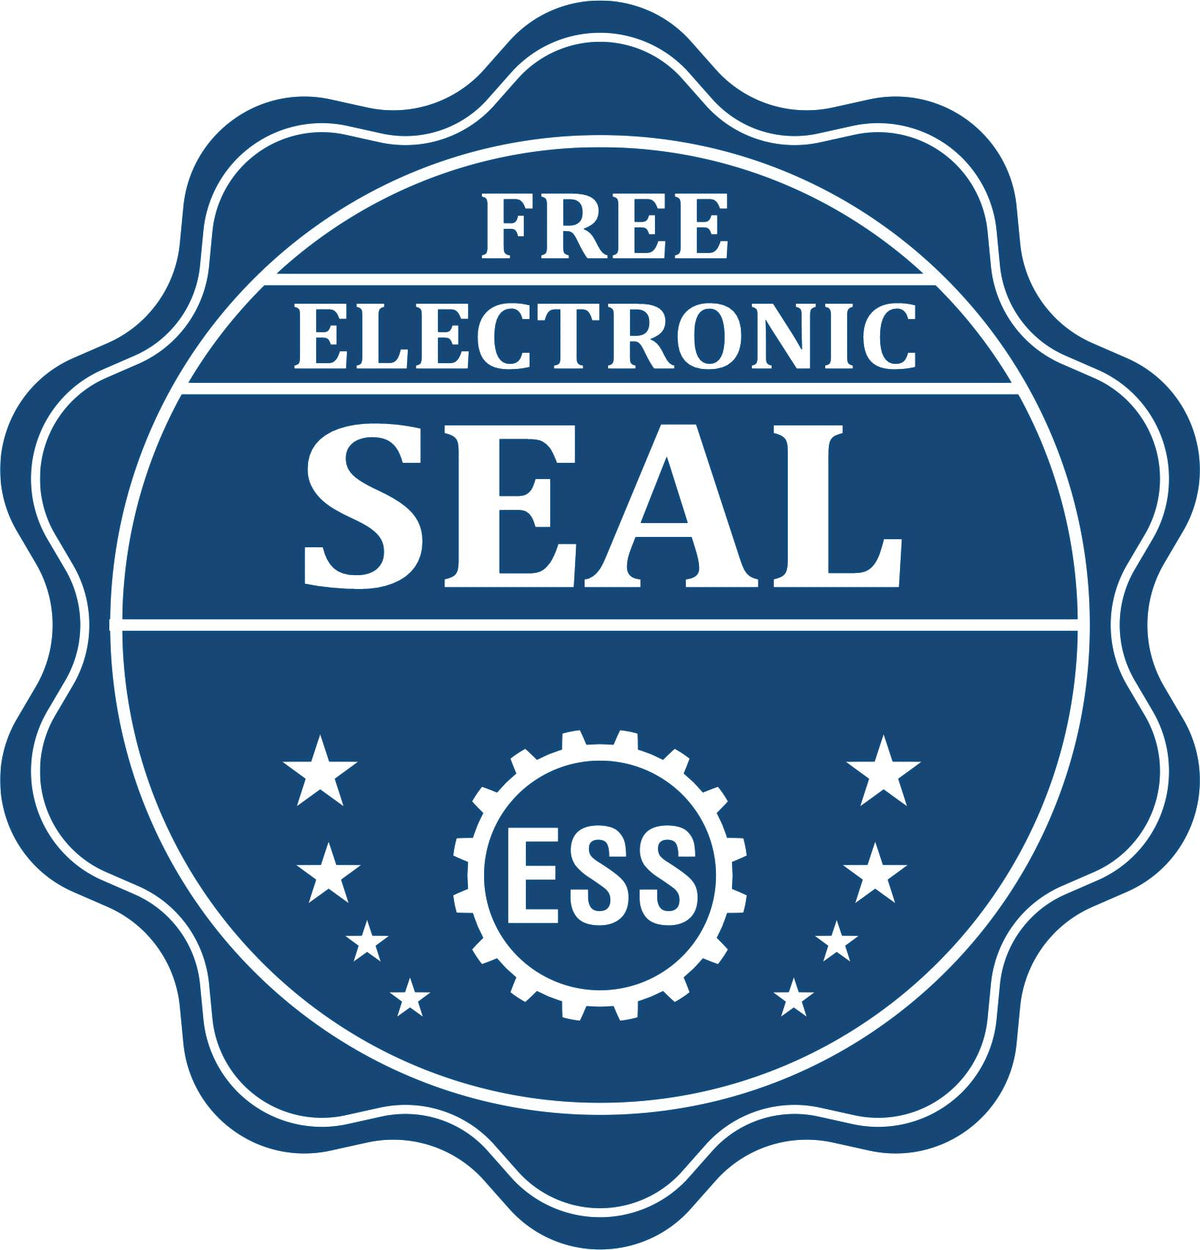 A badge showing a free electronic seal for the Premium MaxLight Pre-Inked Mississippi Geology Stamp with stars and the ESS gear on the emblem.